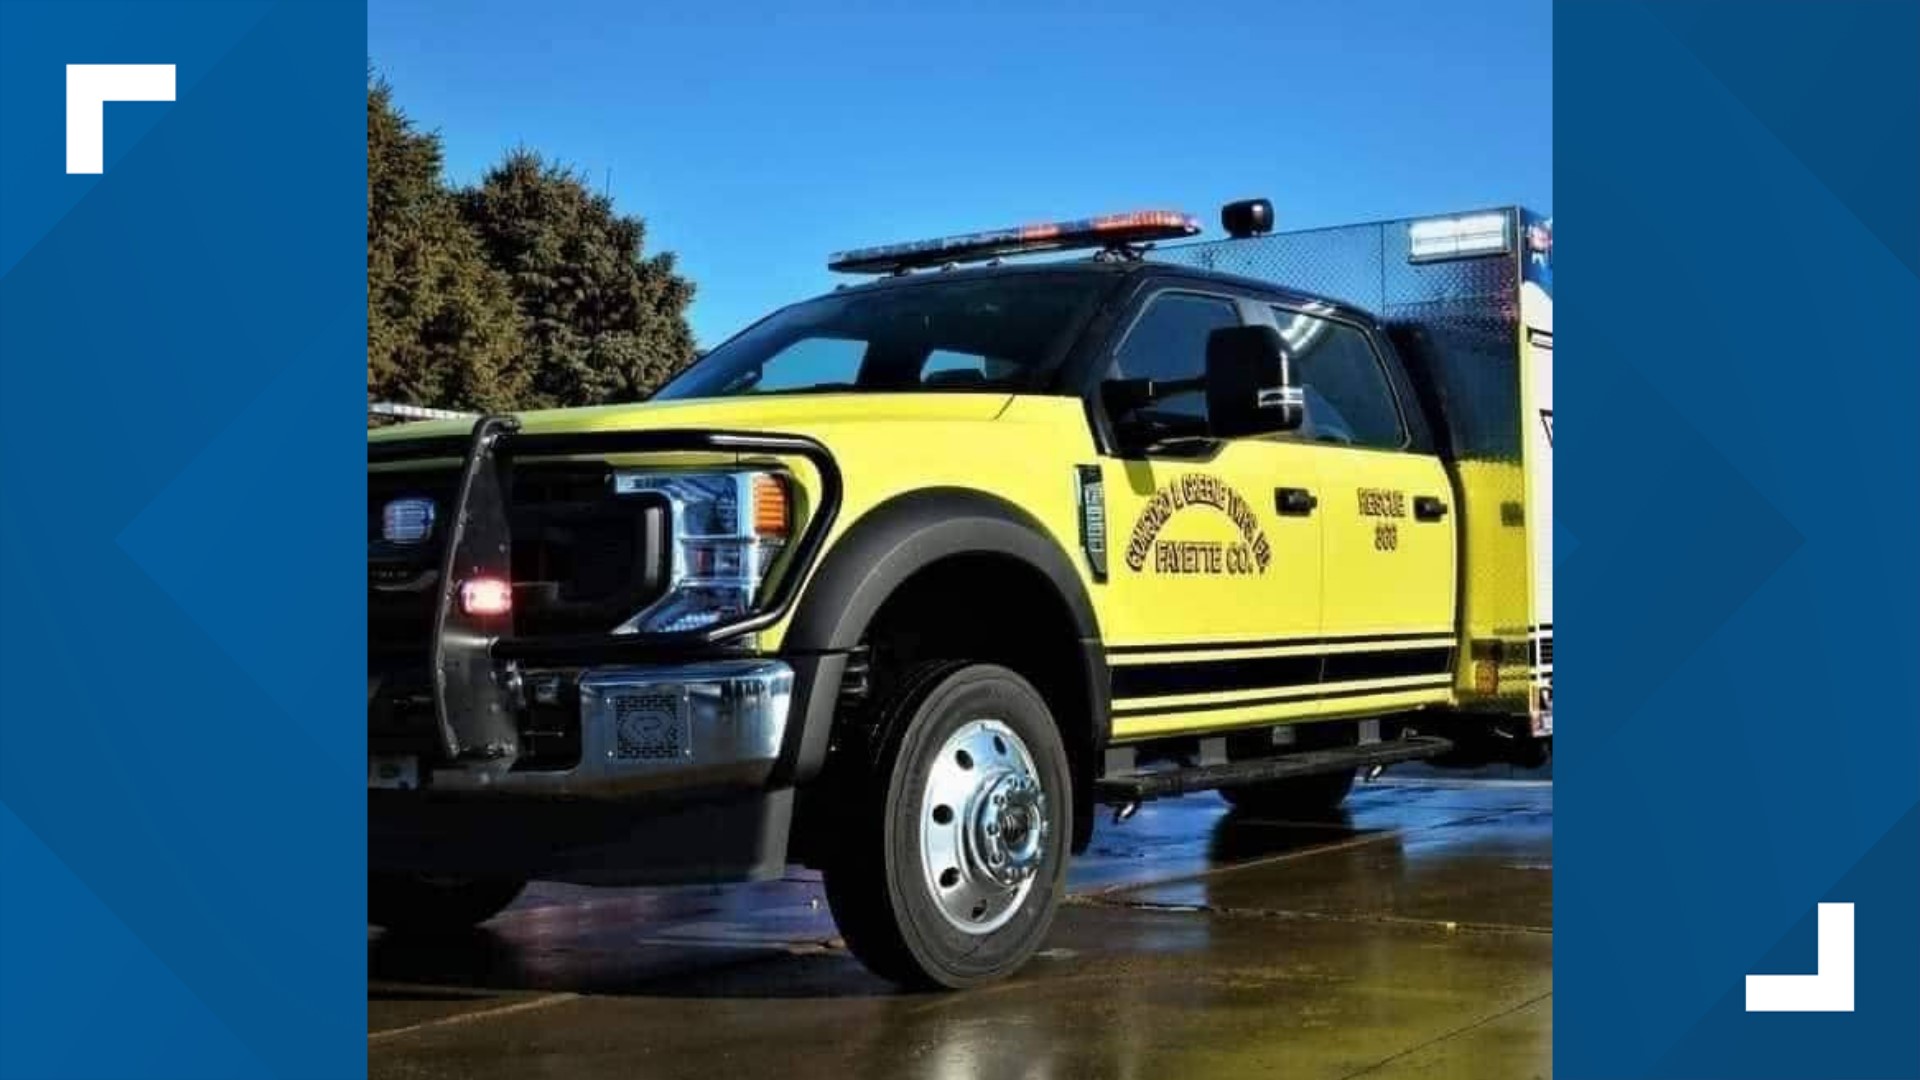 The Concord-Green Fire Department was taken out of service until further notice. Emergency calls will be covered by surrounding fire agencies in the county.